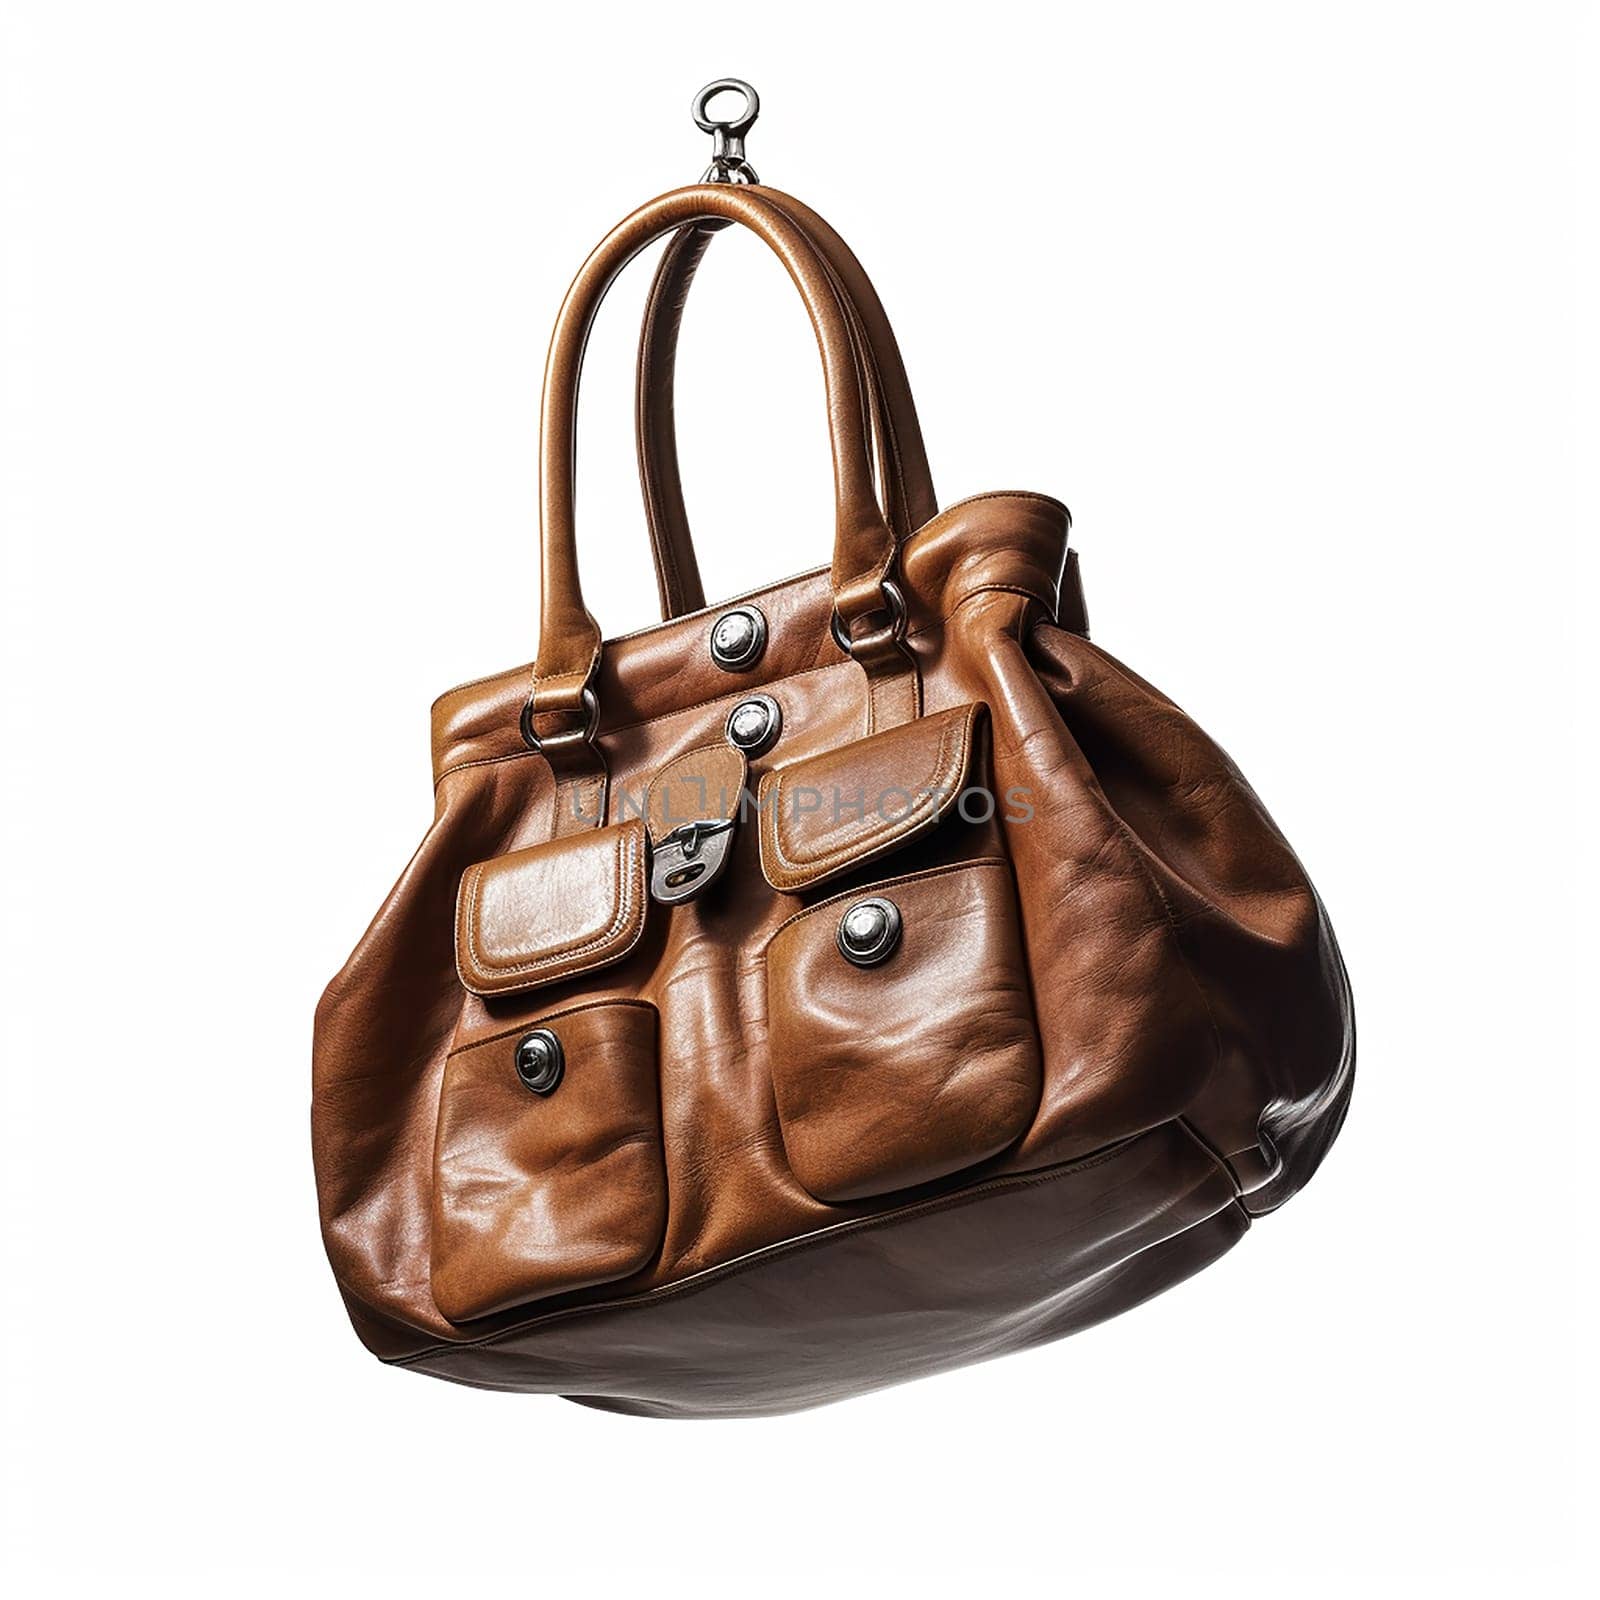 Elegant brown leather handbag with multiple pockets and silver accents. by Hype2art